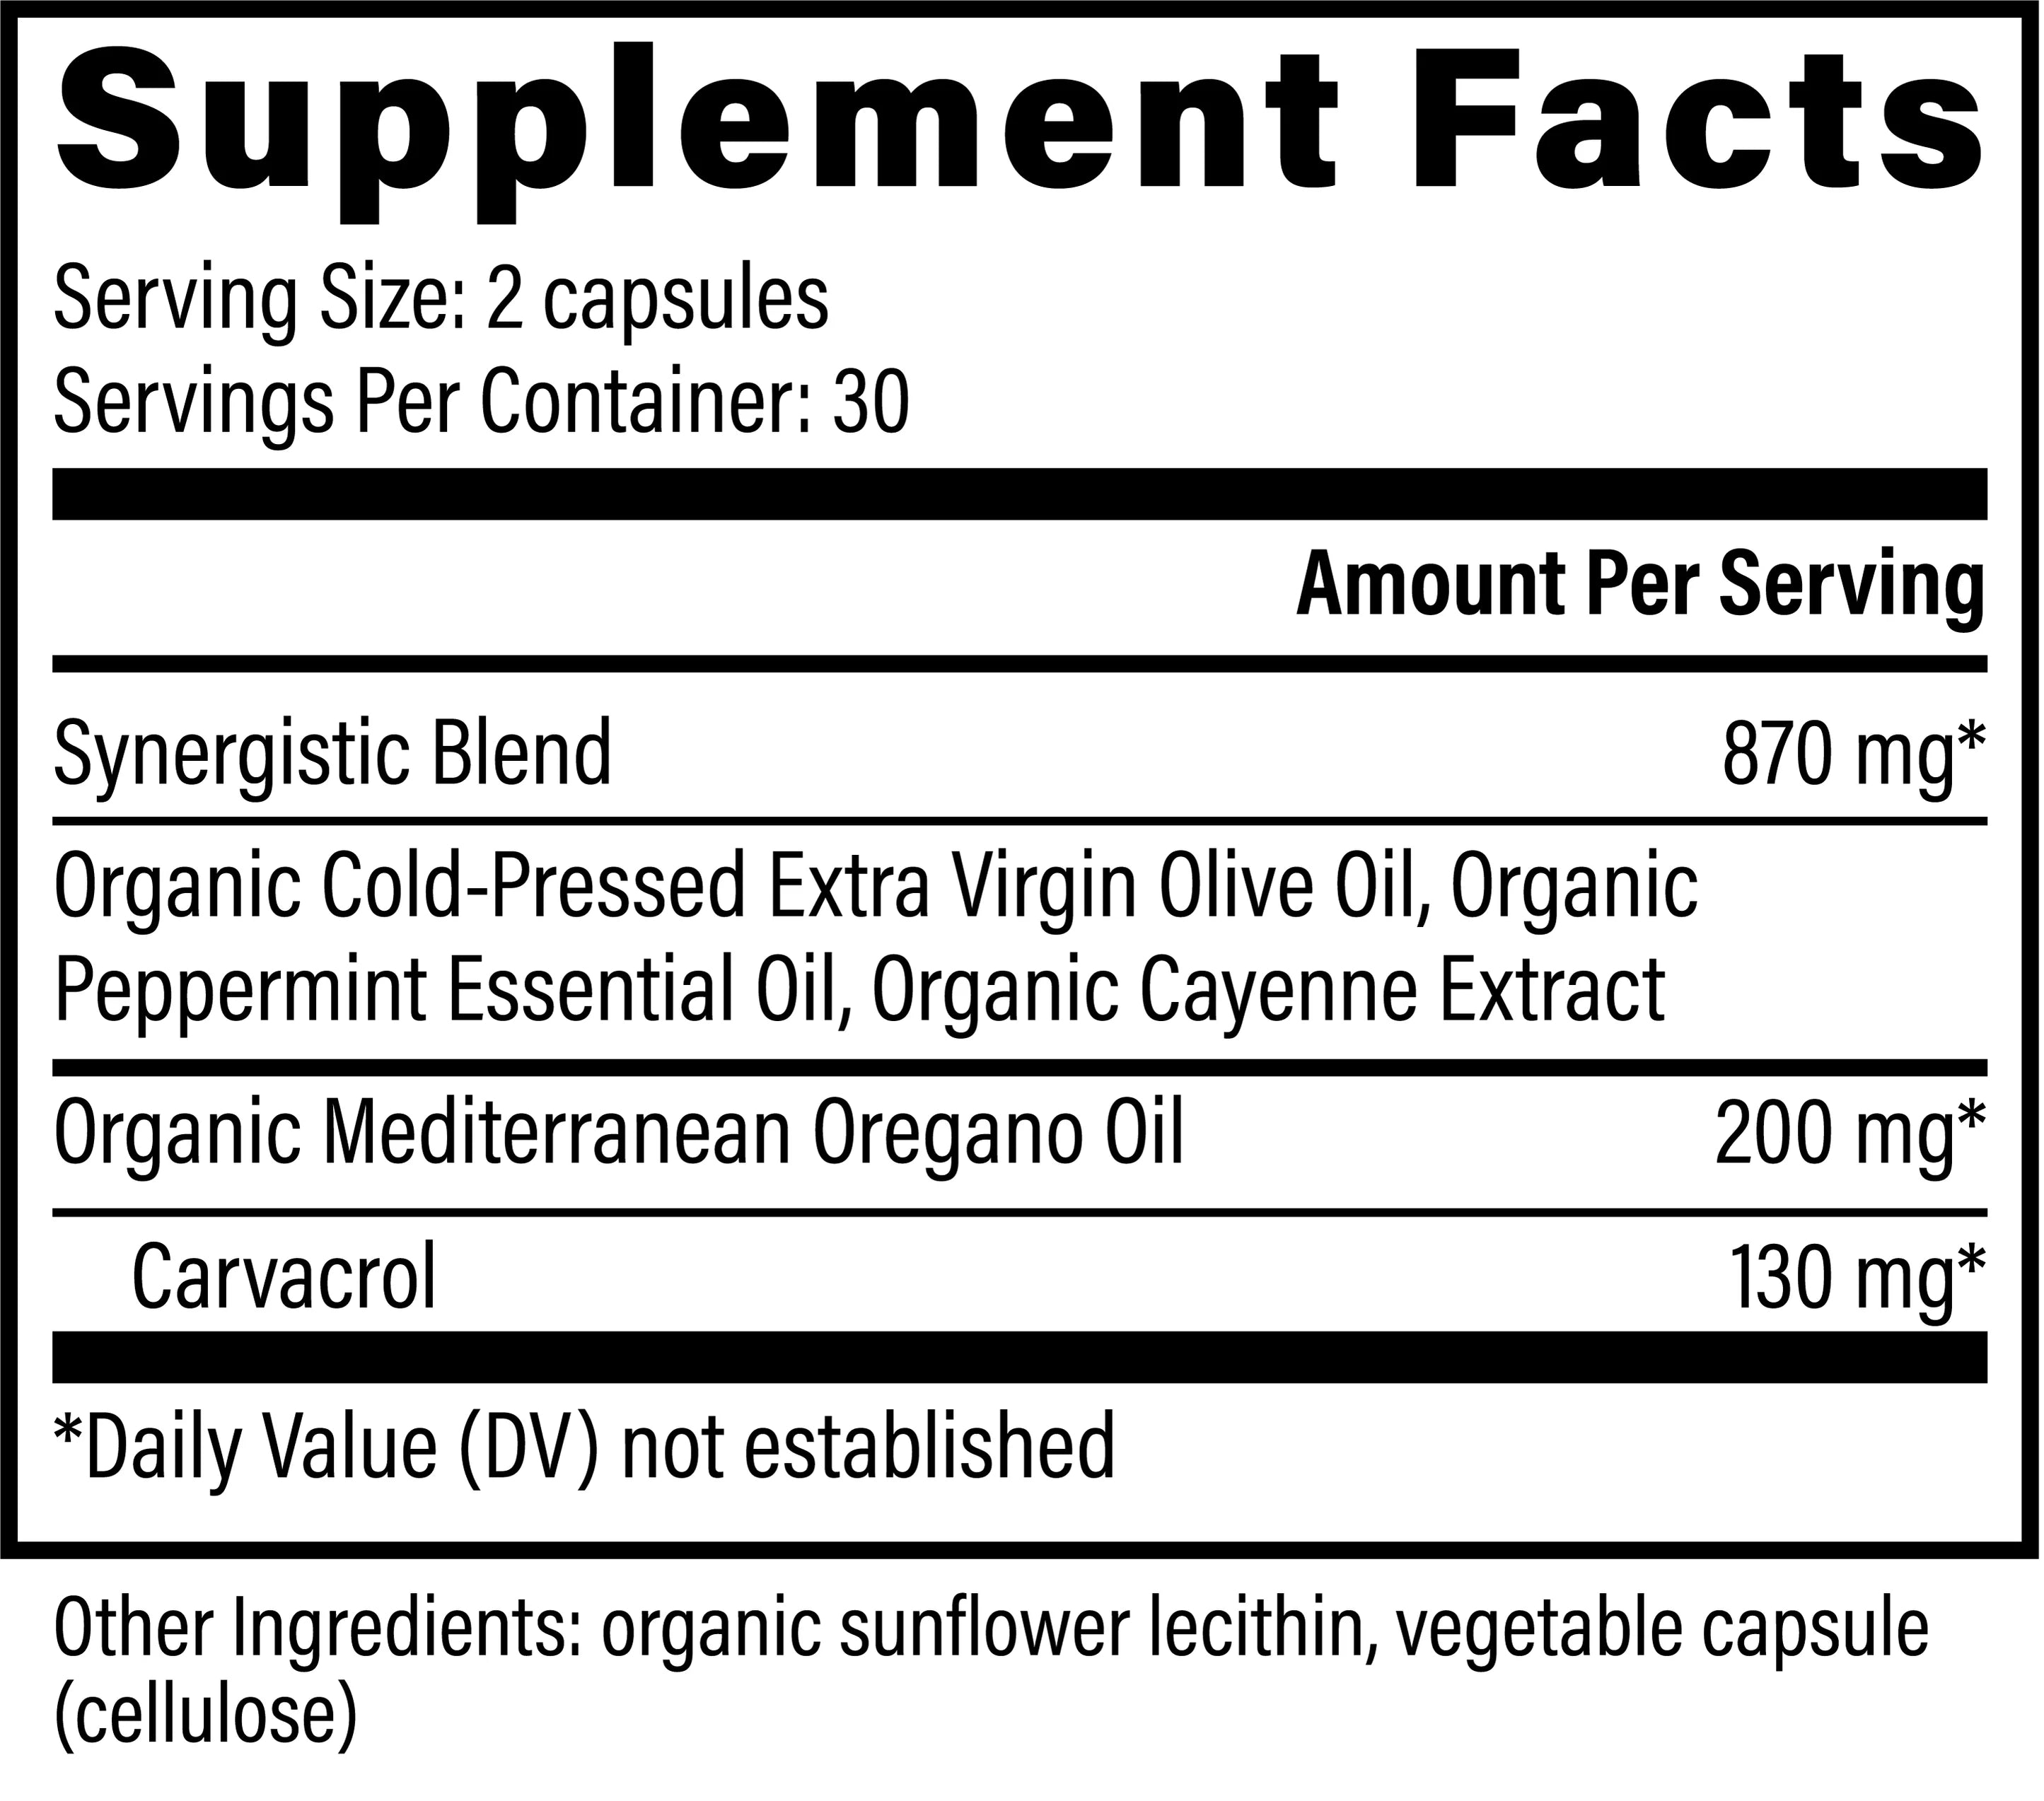 Oregano Oi lcapsules by Glbal Healing Supplement Facts